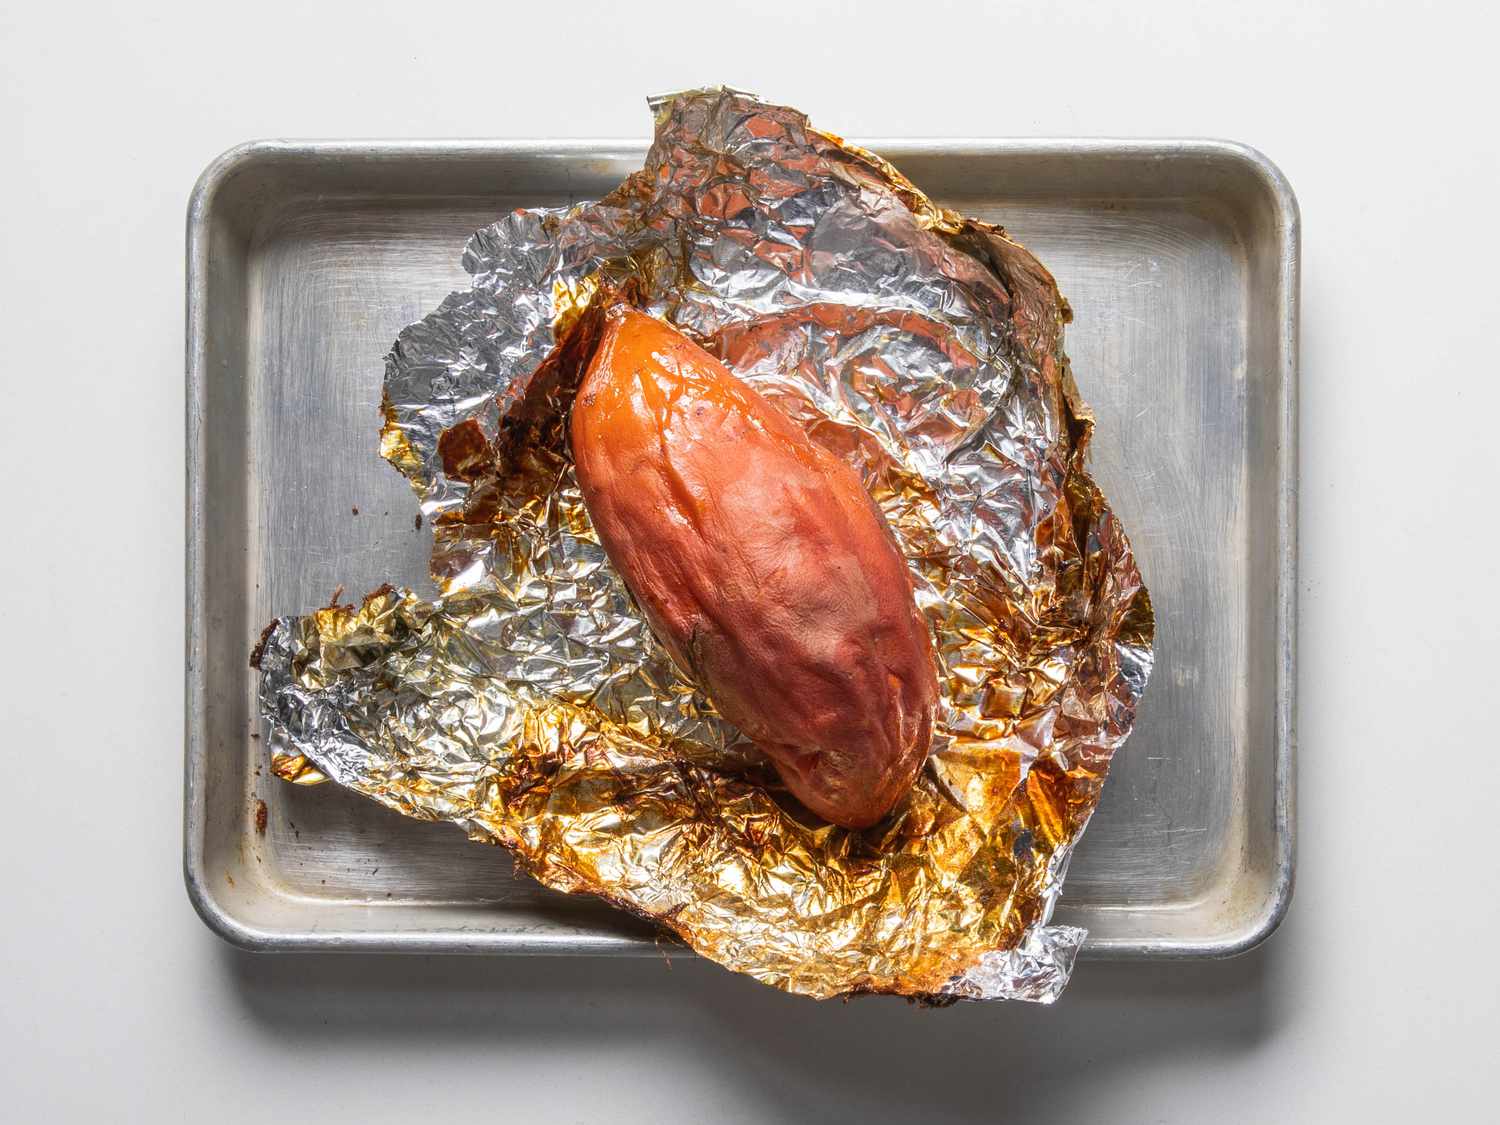 How To Bake A Small Sweet Potato In Foil - Recipes.net